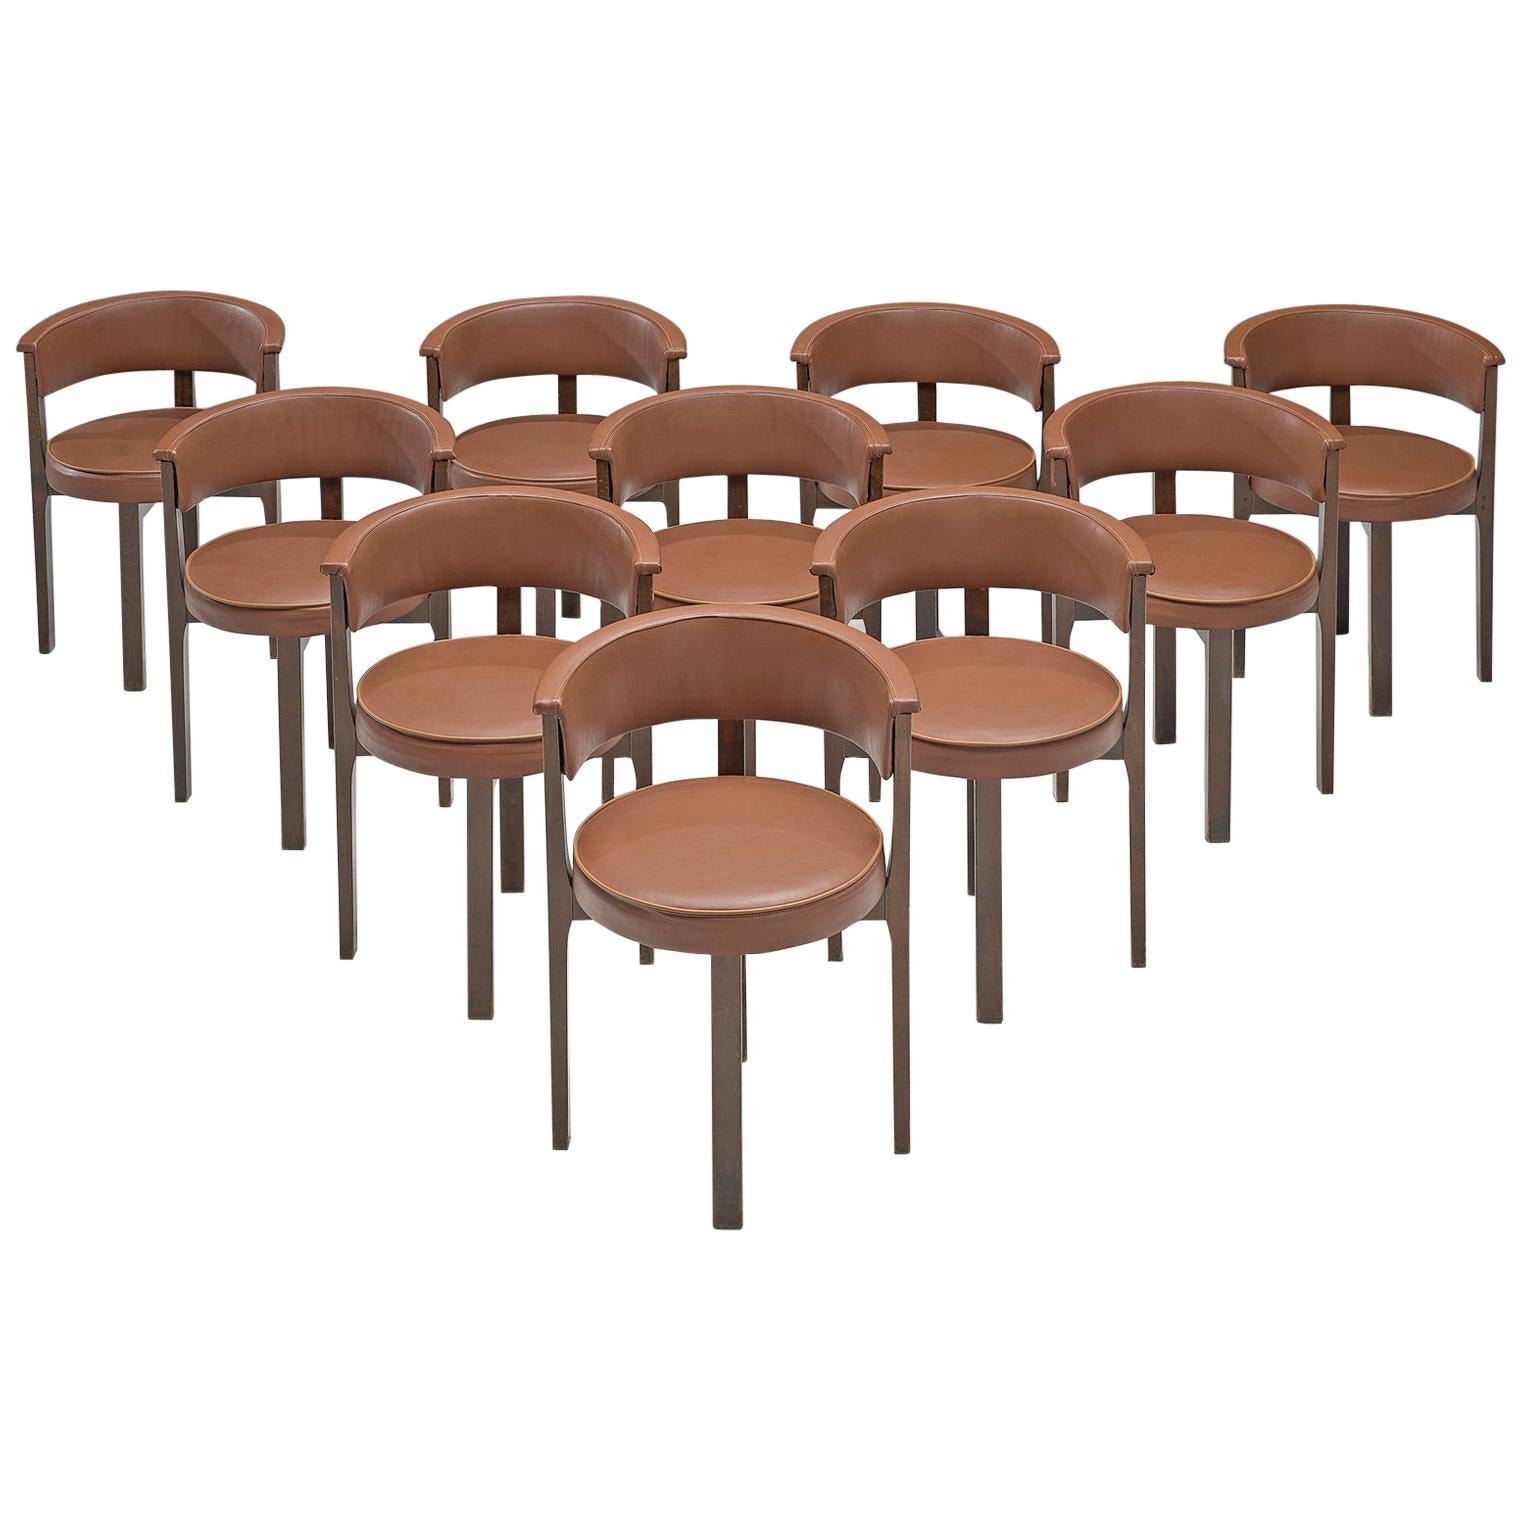 Dutch Set of Ten Armchairs with Round Seat